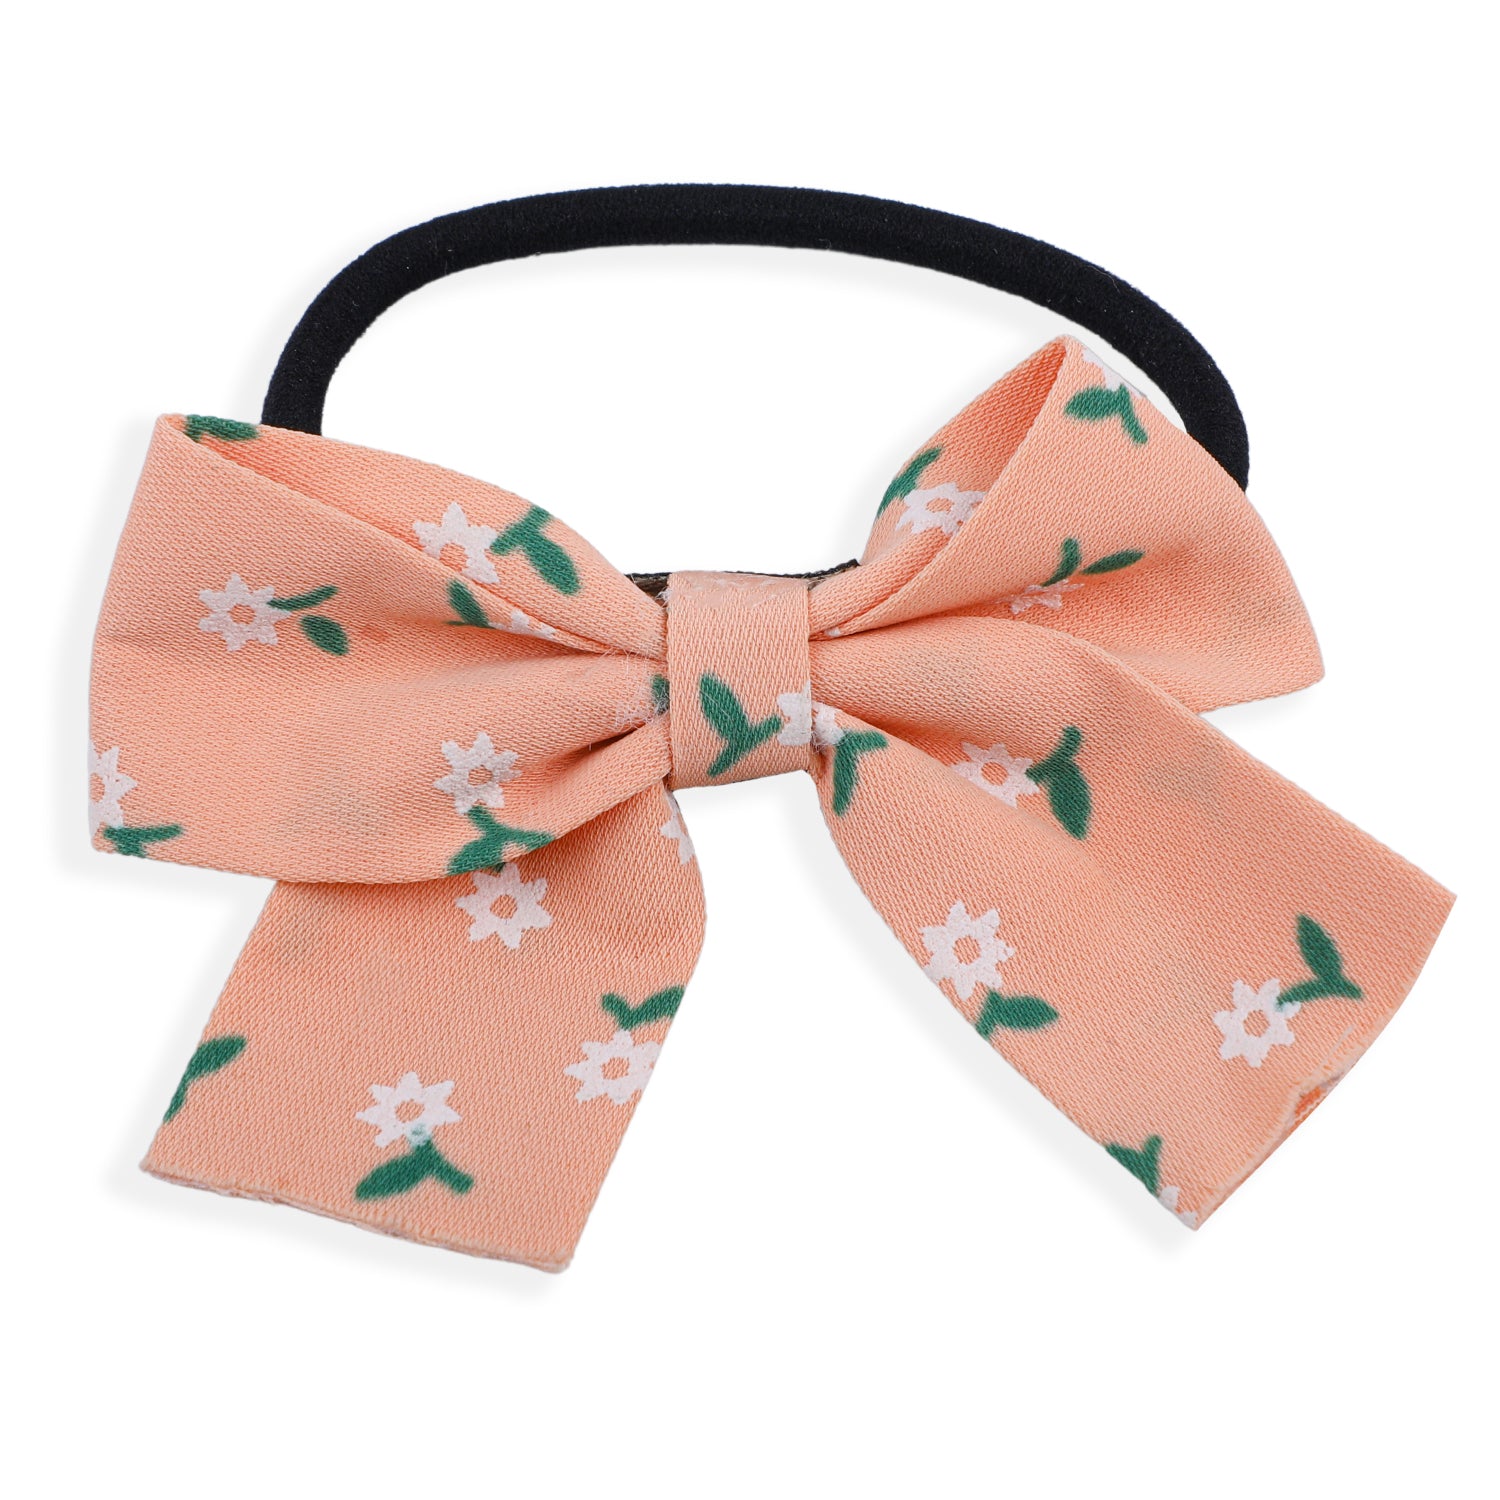 Floral And Solid Rubber Bands Hair Bows 2 Pcs - Peach, Pink - Baby Moo